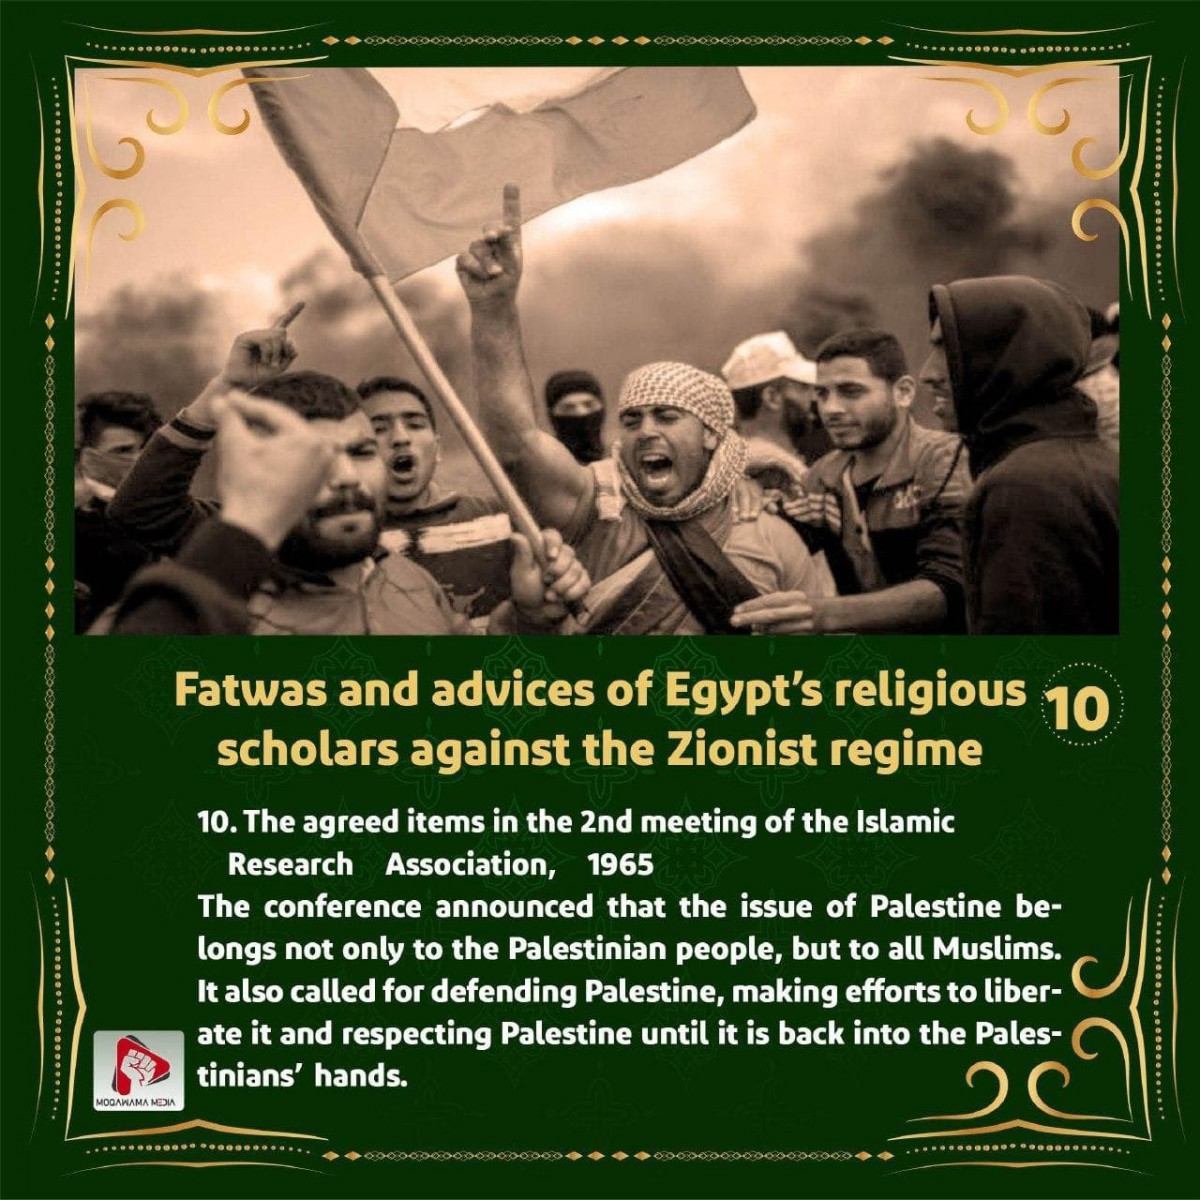 Fatwas and advices of Egypt's religious scholars against the Zionist regime 9